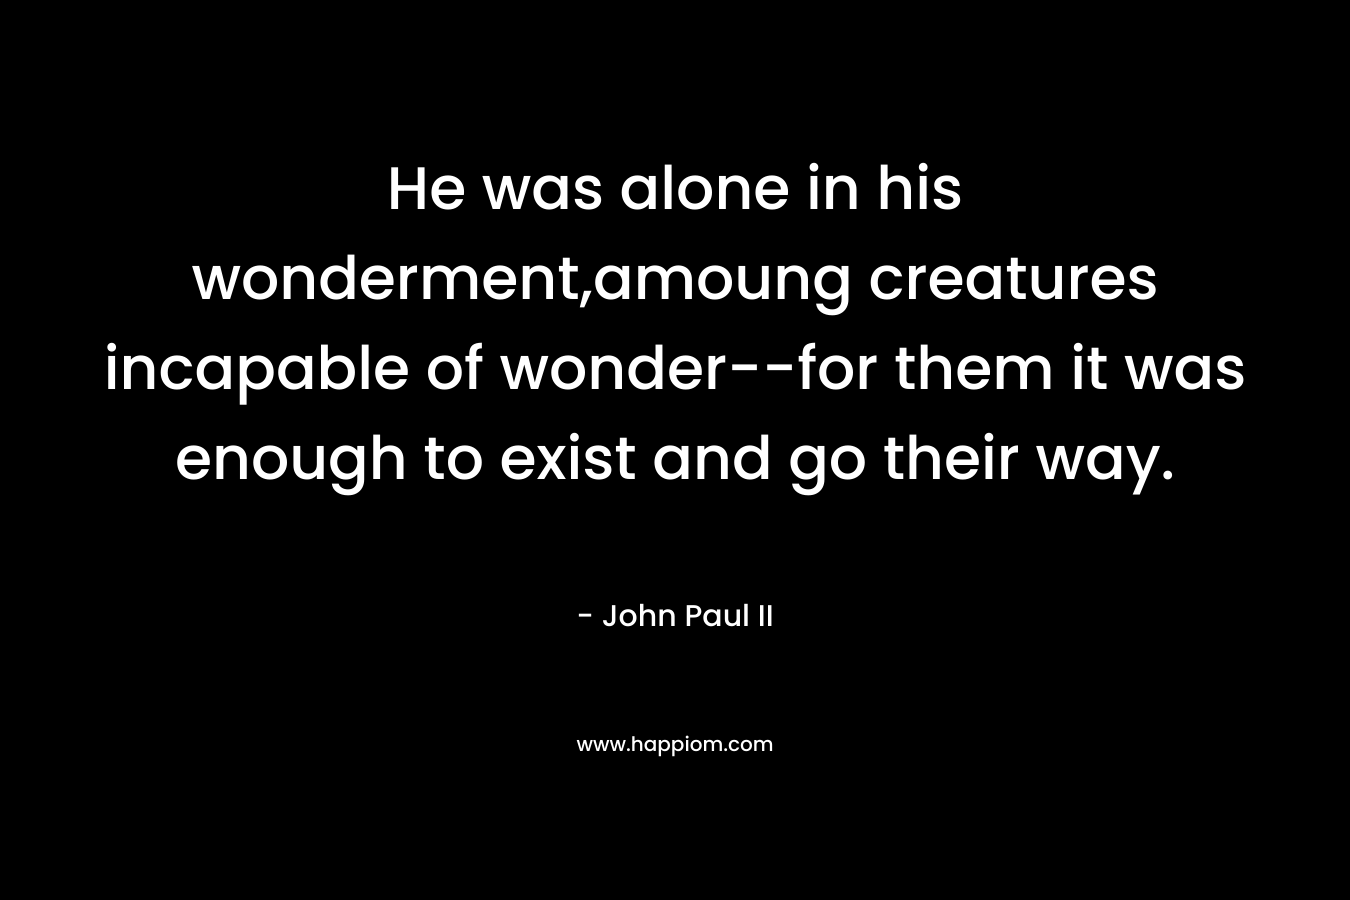 He was alone in his wonderment,amoung creatures incapable of wonder--for them it was enough to exist and go their way.